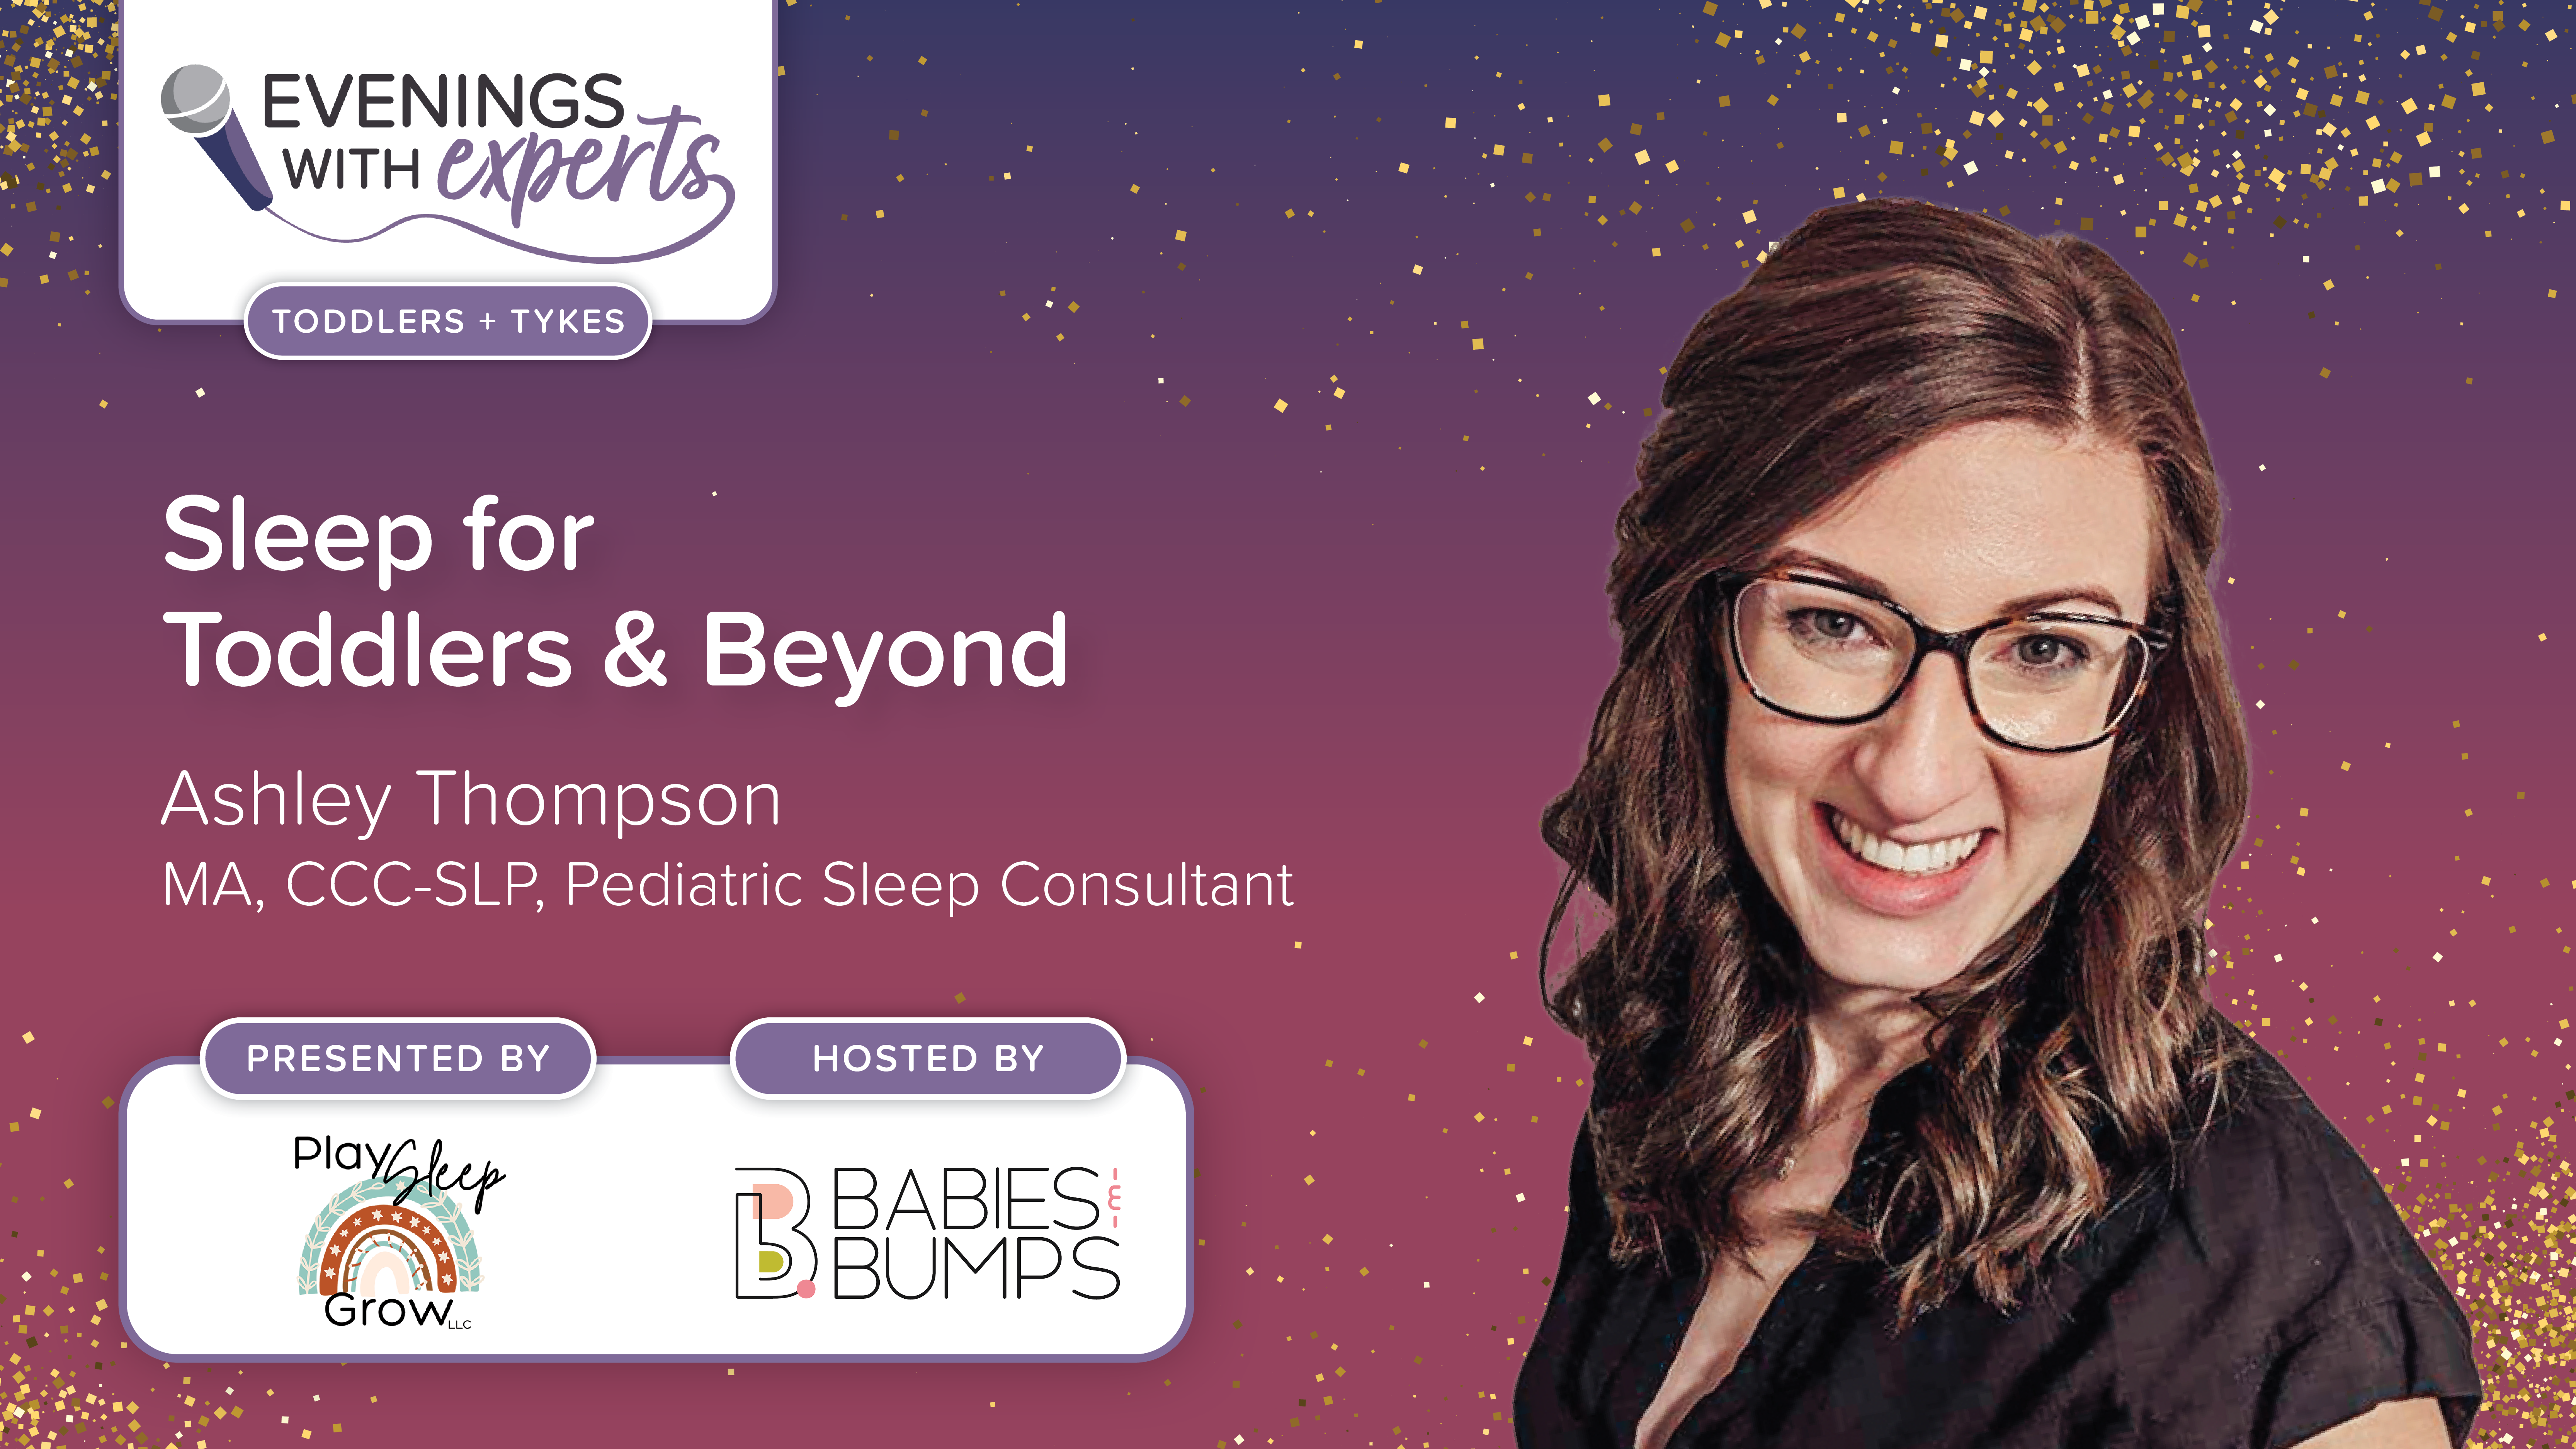 Evenings with Experts: Sleep for Toddlers & Beyond featuring Ashley Thompson, MA, CCC-SLP. Presented by Play, Sleep, Grow. Hosted by Babies & Bumps.